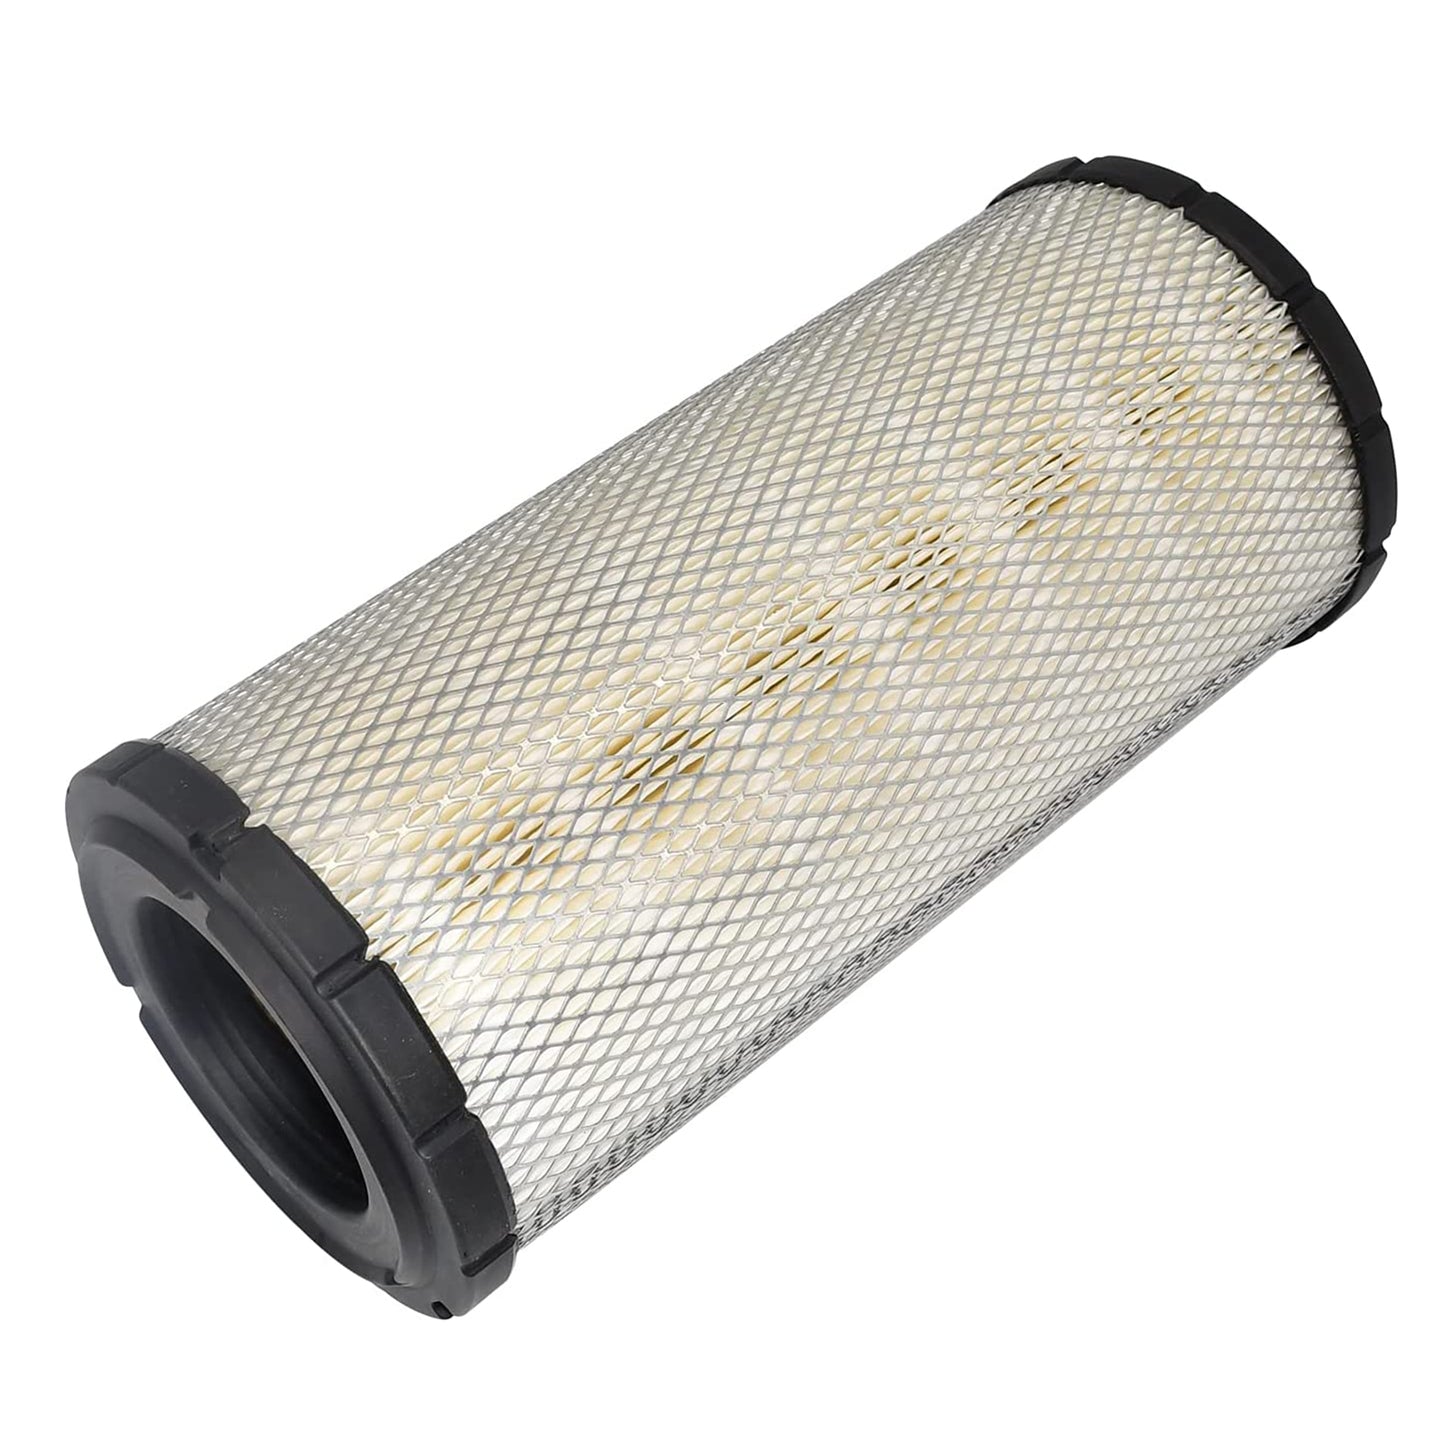 26510342 Air Filter Compatible With Perkins Engine 1004-4 1004-40 1004-40T 1004-42 1004-4T